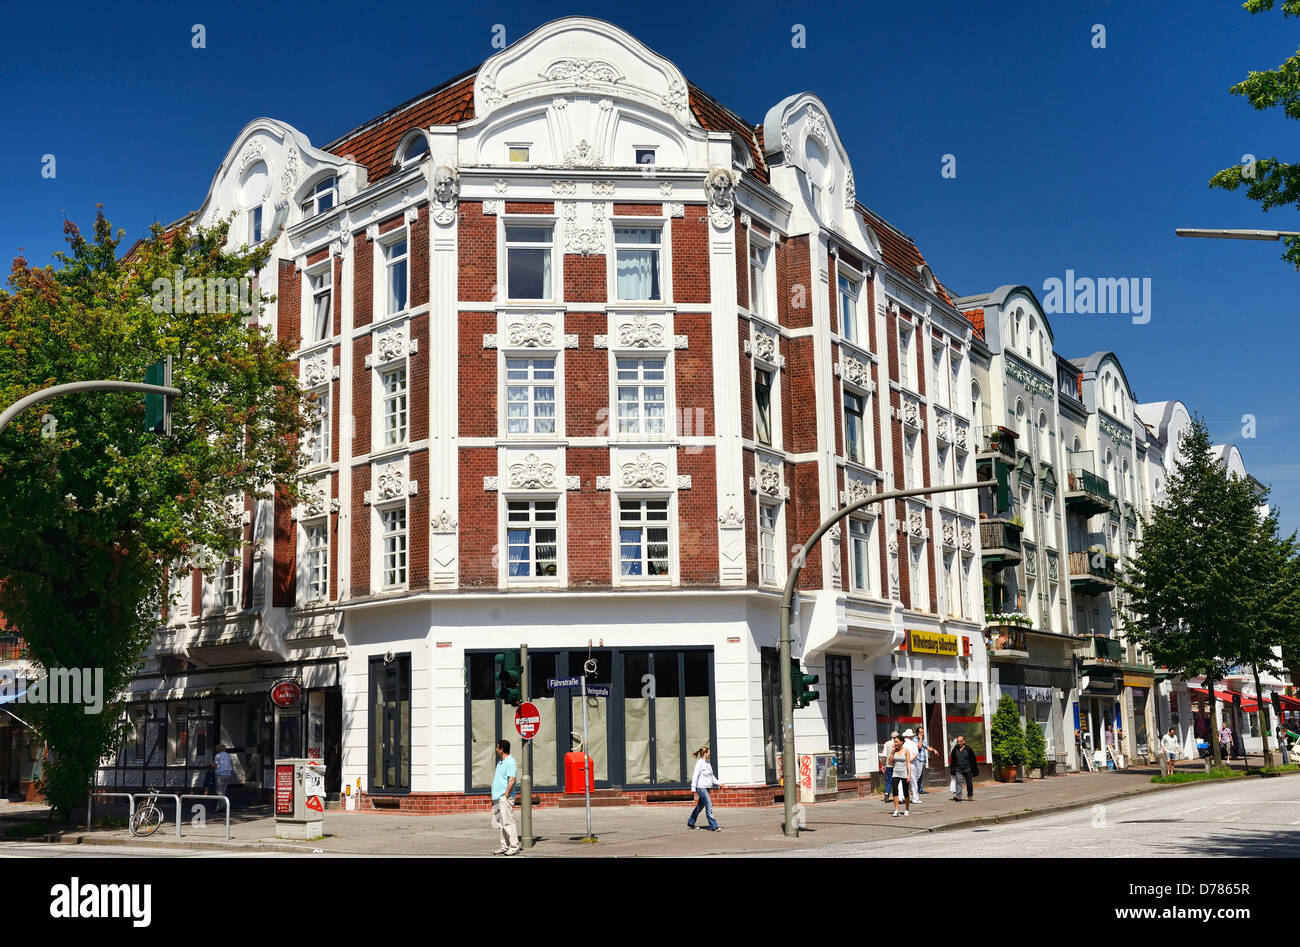 Historical residential building on the corner Veringstrasse and Fährstrasse in Wilhelm's castle, Hamburg, Germany, Europe Stock Photo